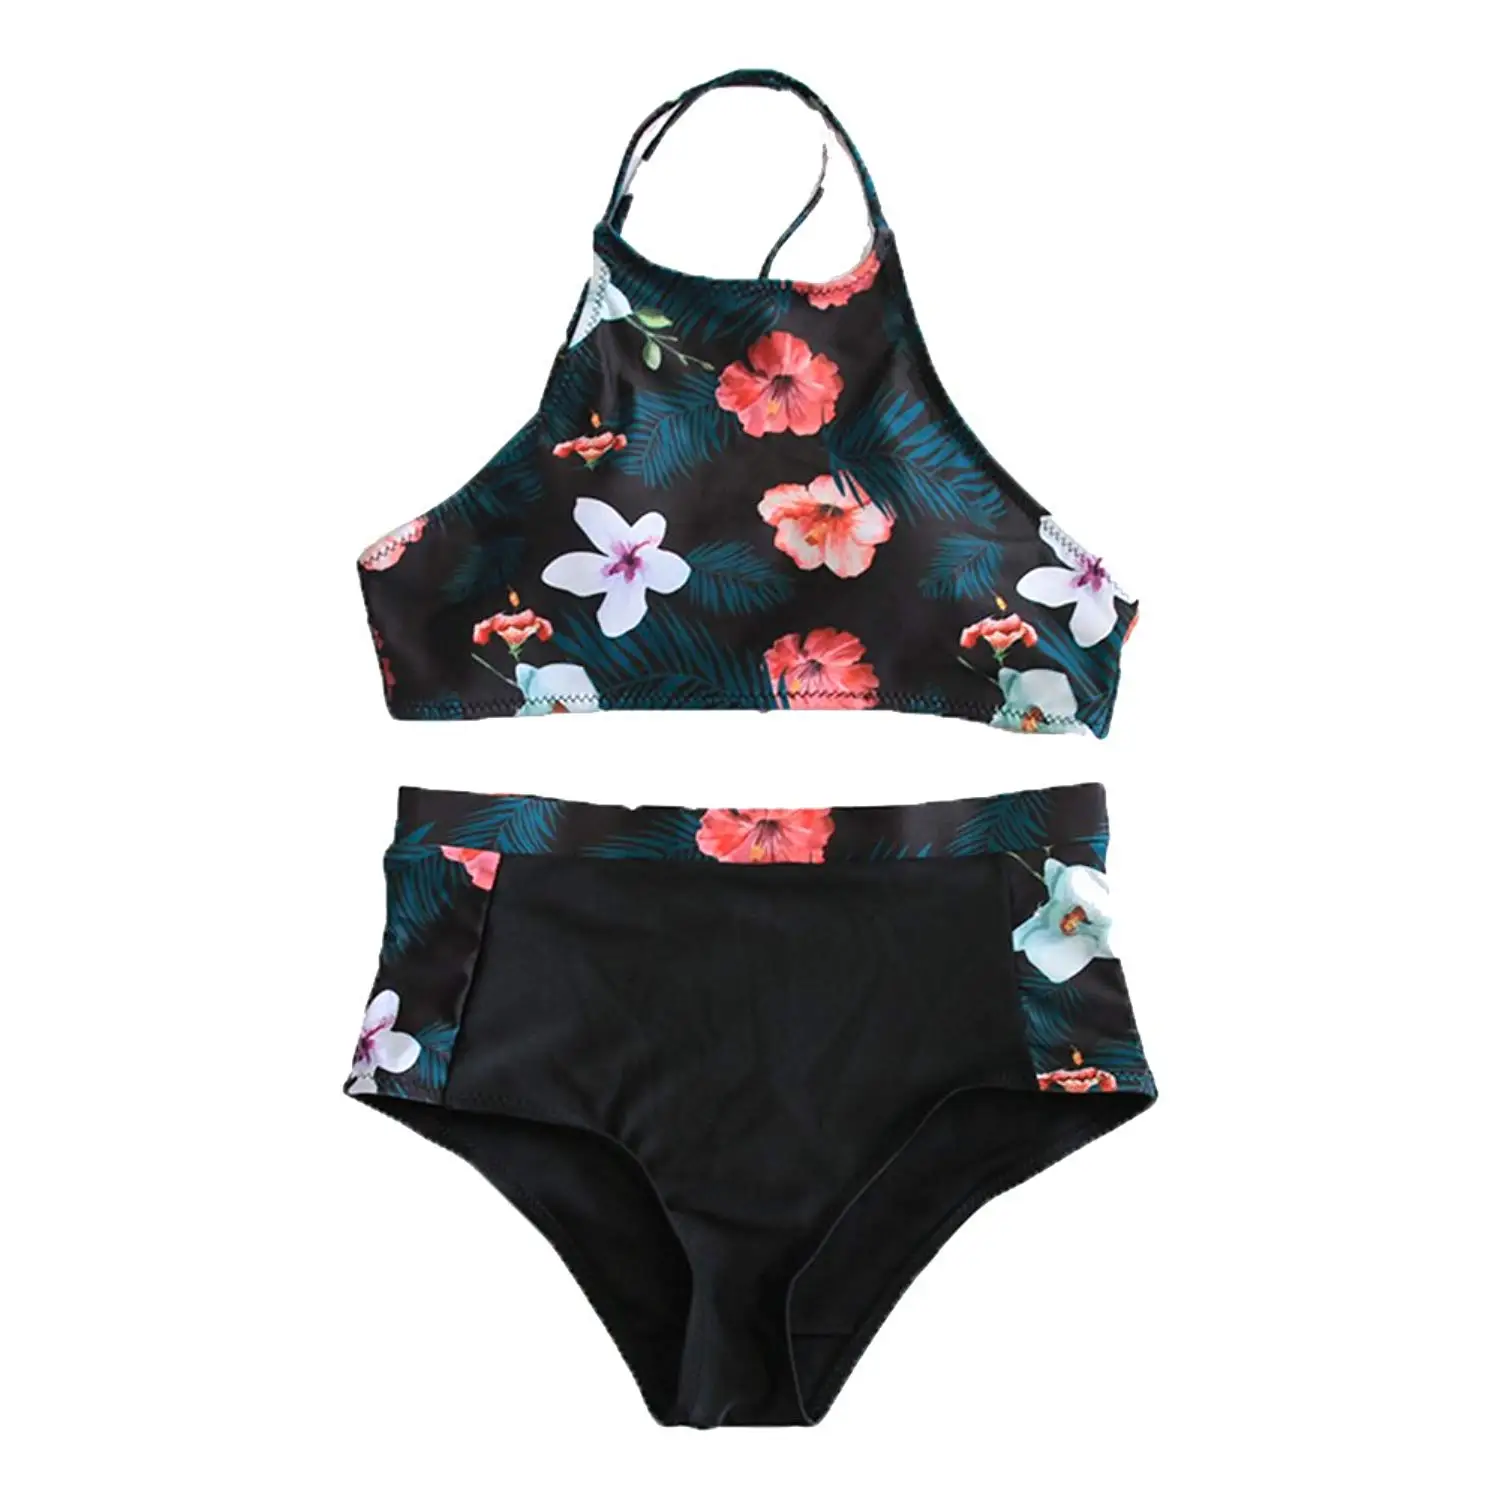 Cheap Skinny Swimsuits, find Skinny Swimsuits deals on line at Alibaba.com